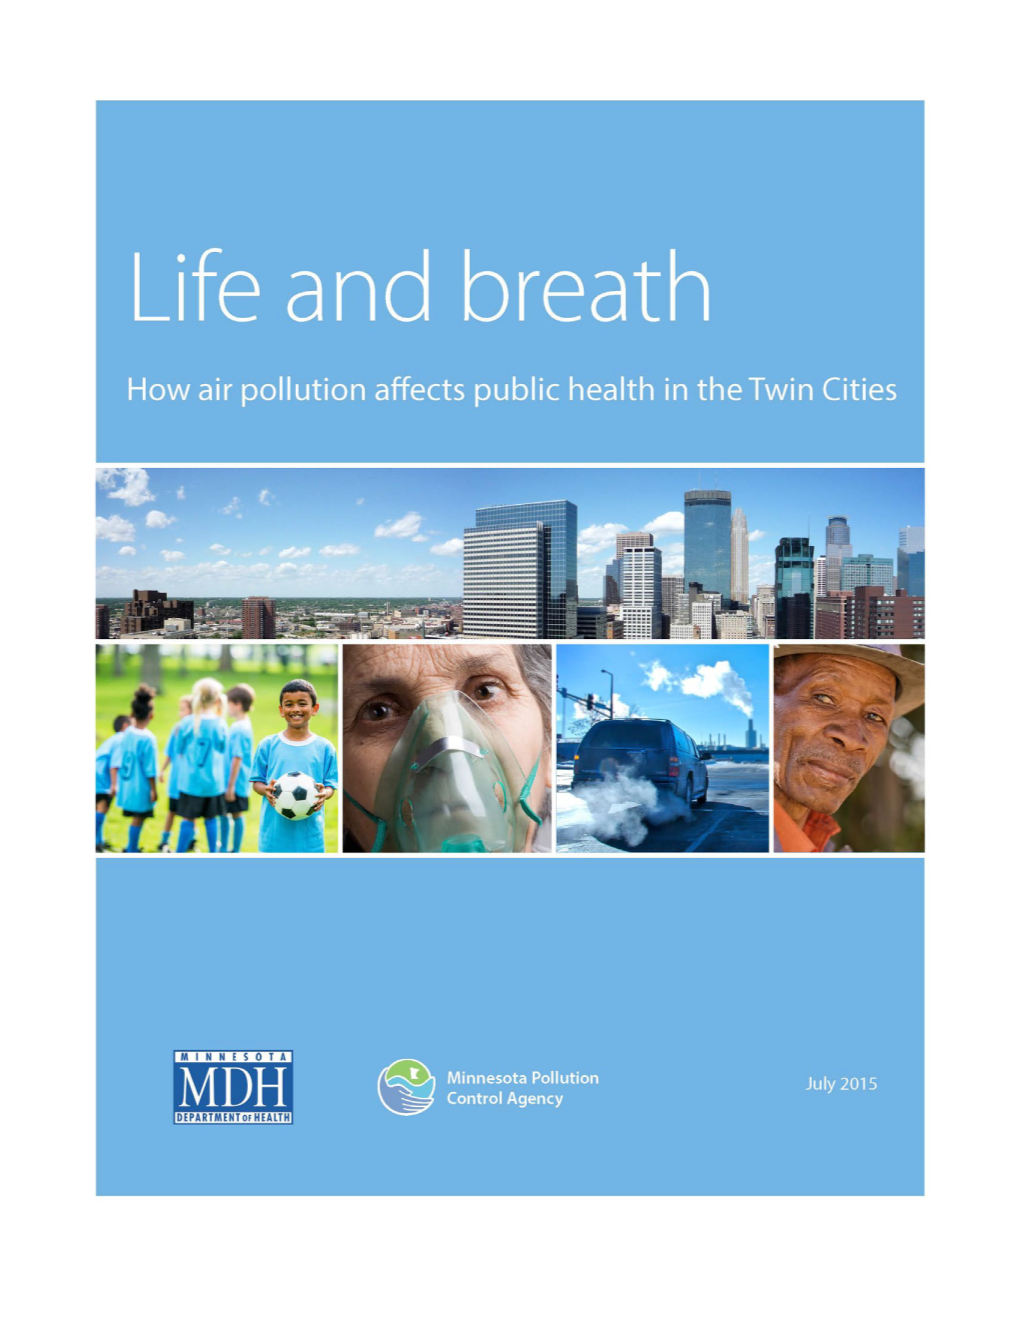 Life and Breath: How Air Pollution Affects Public Health in the Twin Cities